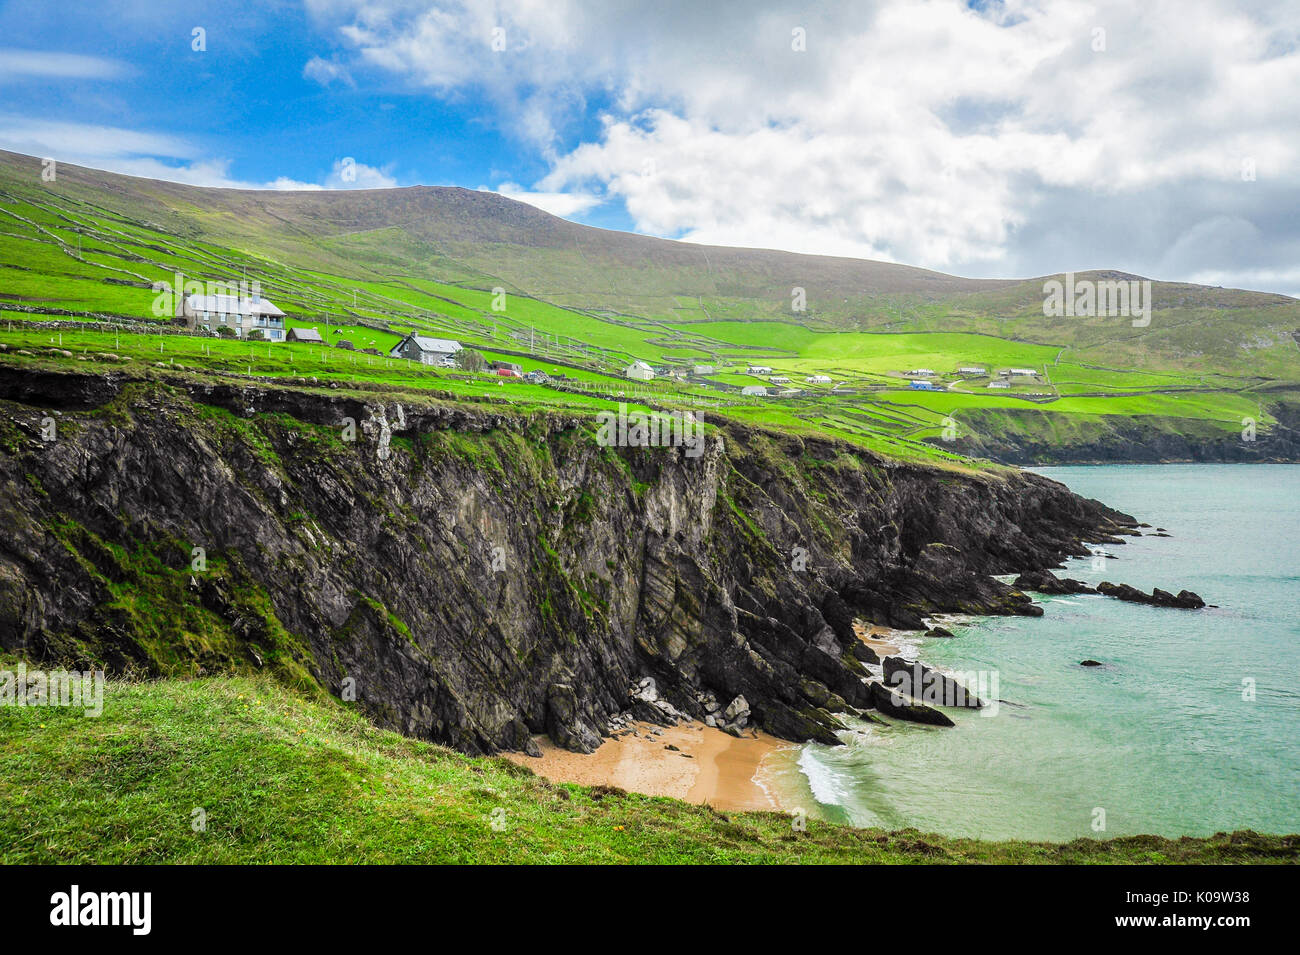 Seaside village above Clogher Strand on the Dingle Peninsula, County Kerry, Ireland Stock Photo